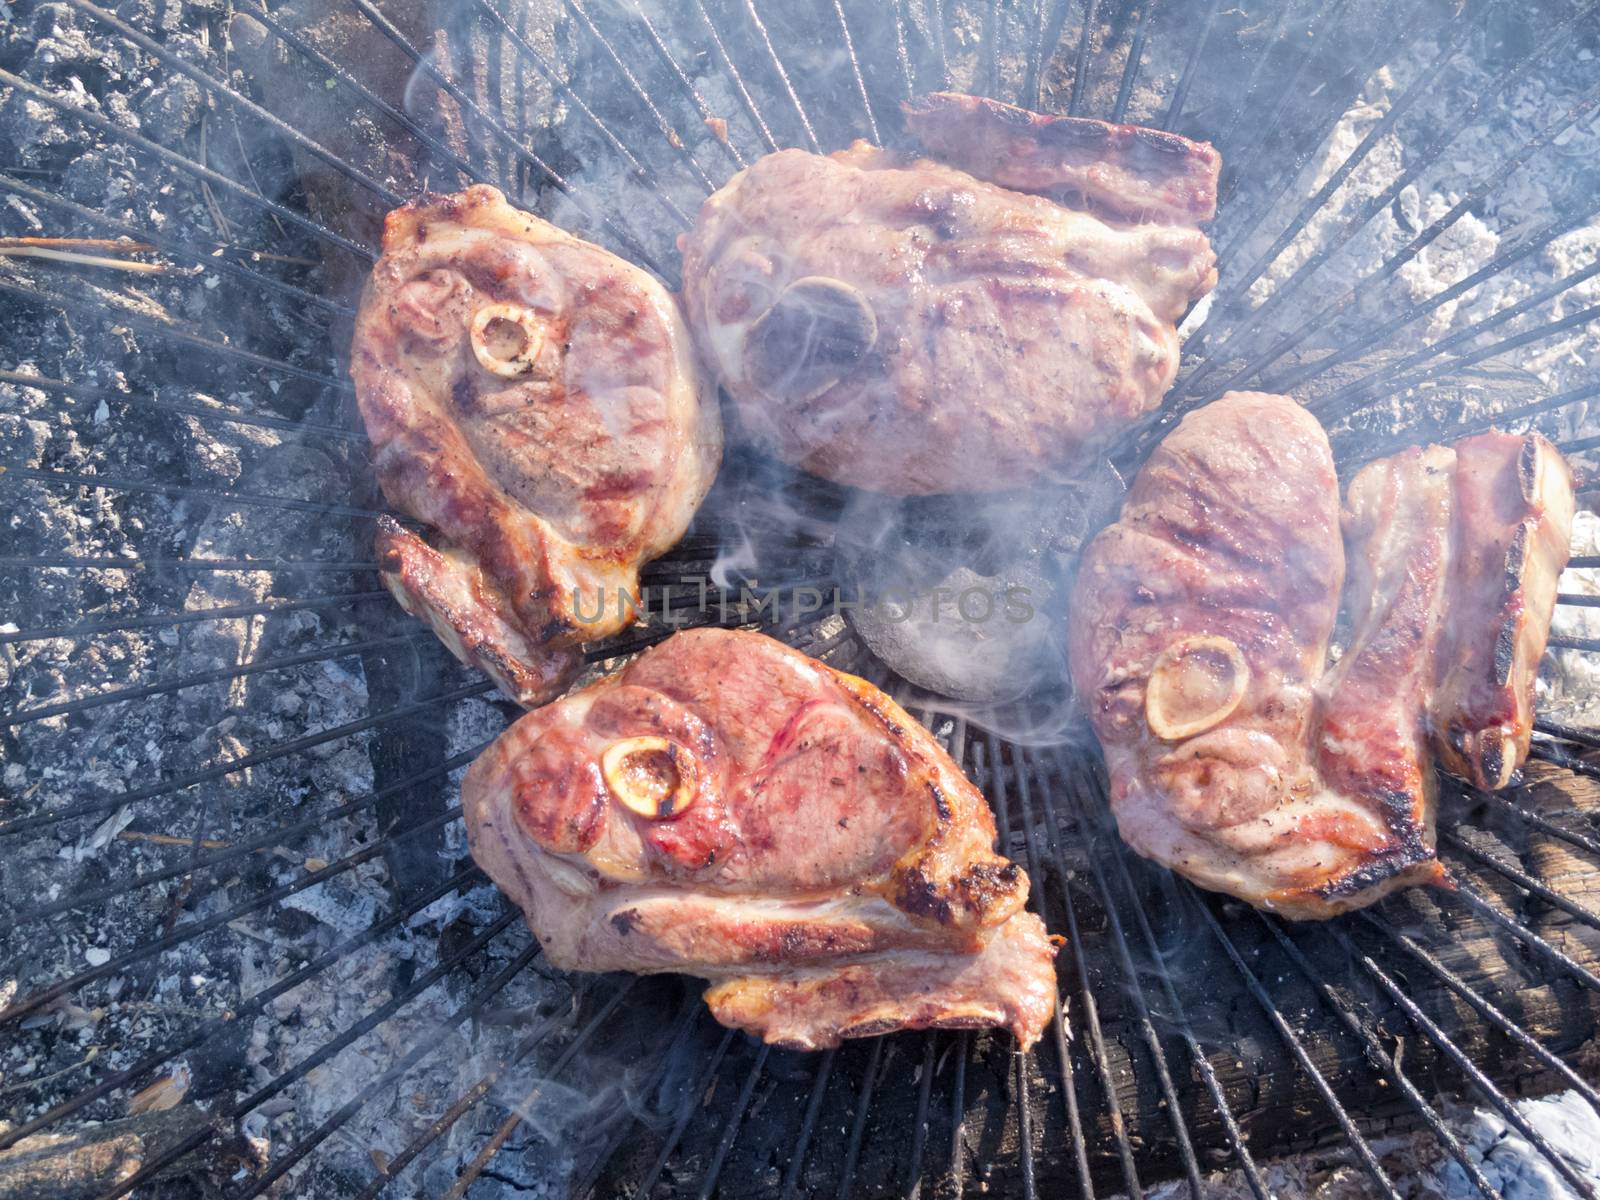 Pork chops hot charcoal barbeque grilling smoke by PiLens